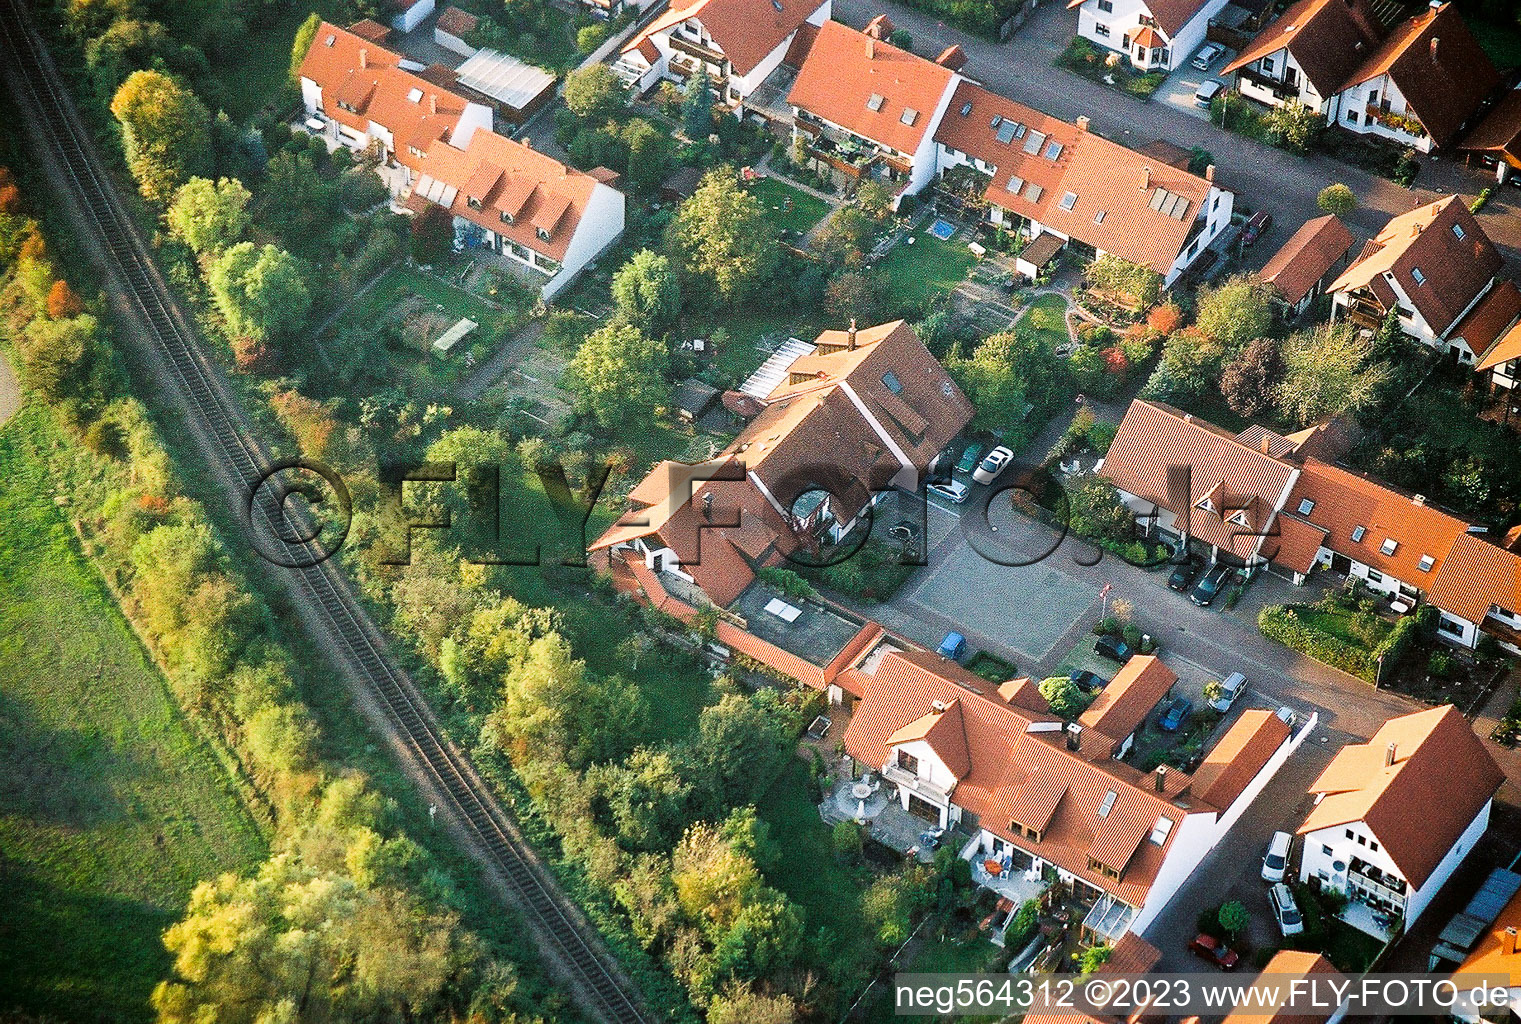 Aerial photograpy of In the Mirabelle Garden in Kandel in the state Rhineland-Palatinate, Germany